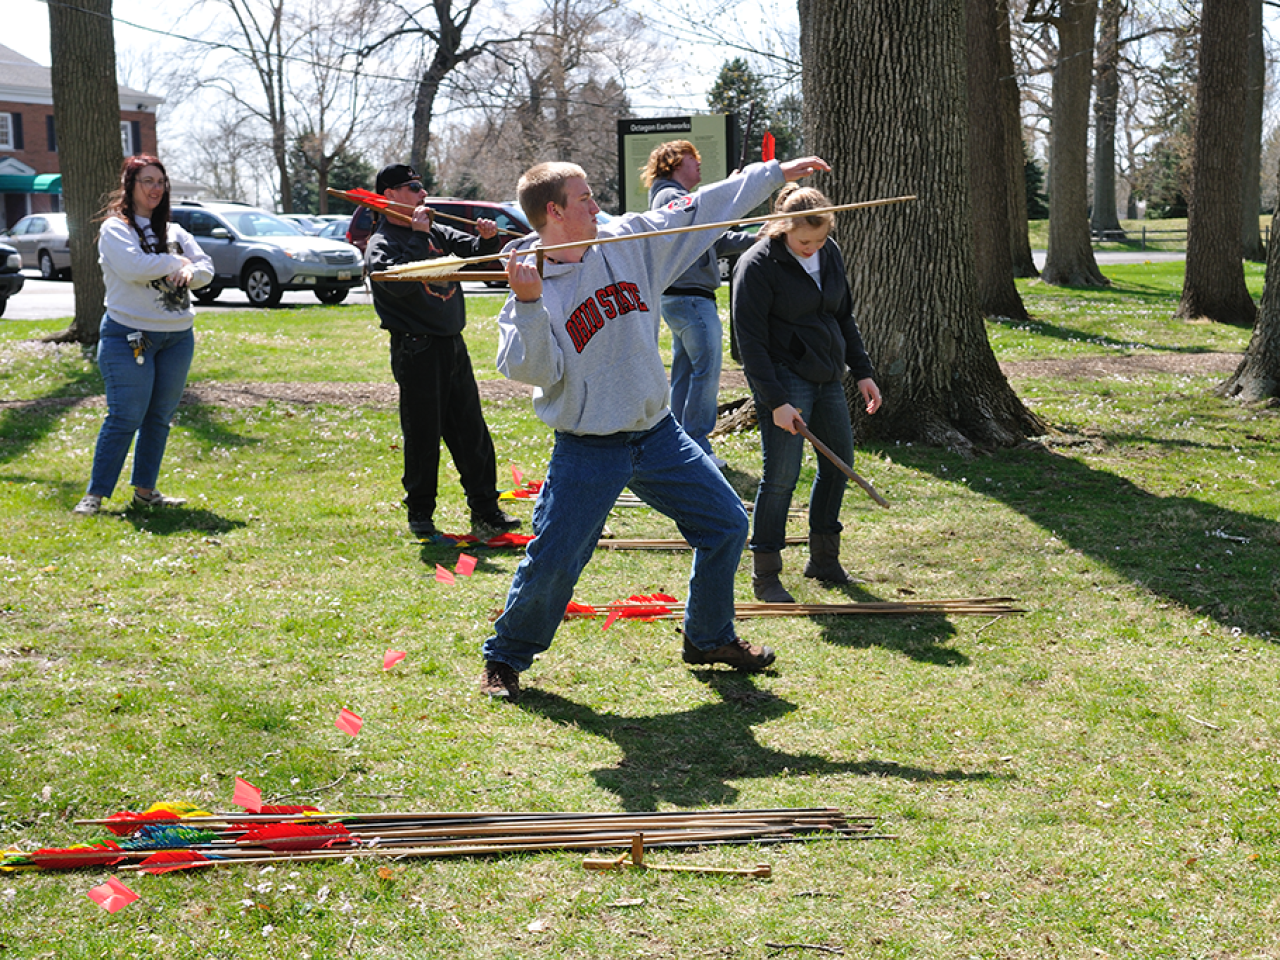 Students in mid-motion of throwing an atlatl [an assistive tool for spear throwing] at the Octagon State Memorial, Newark.